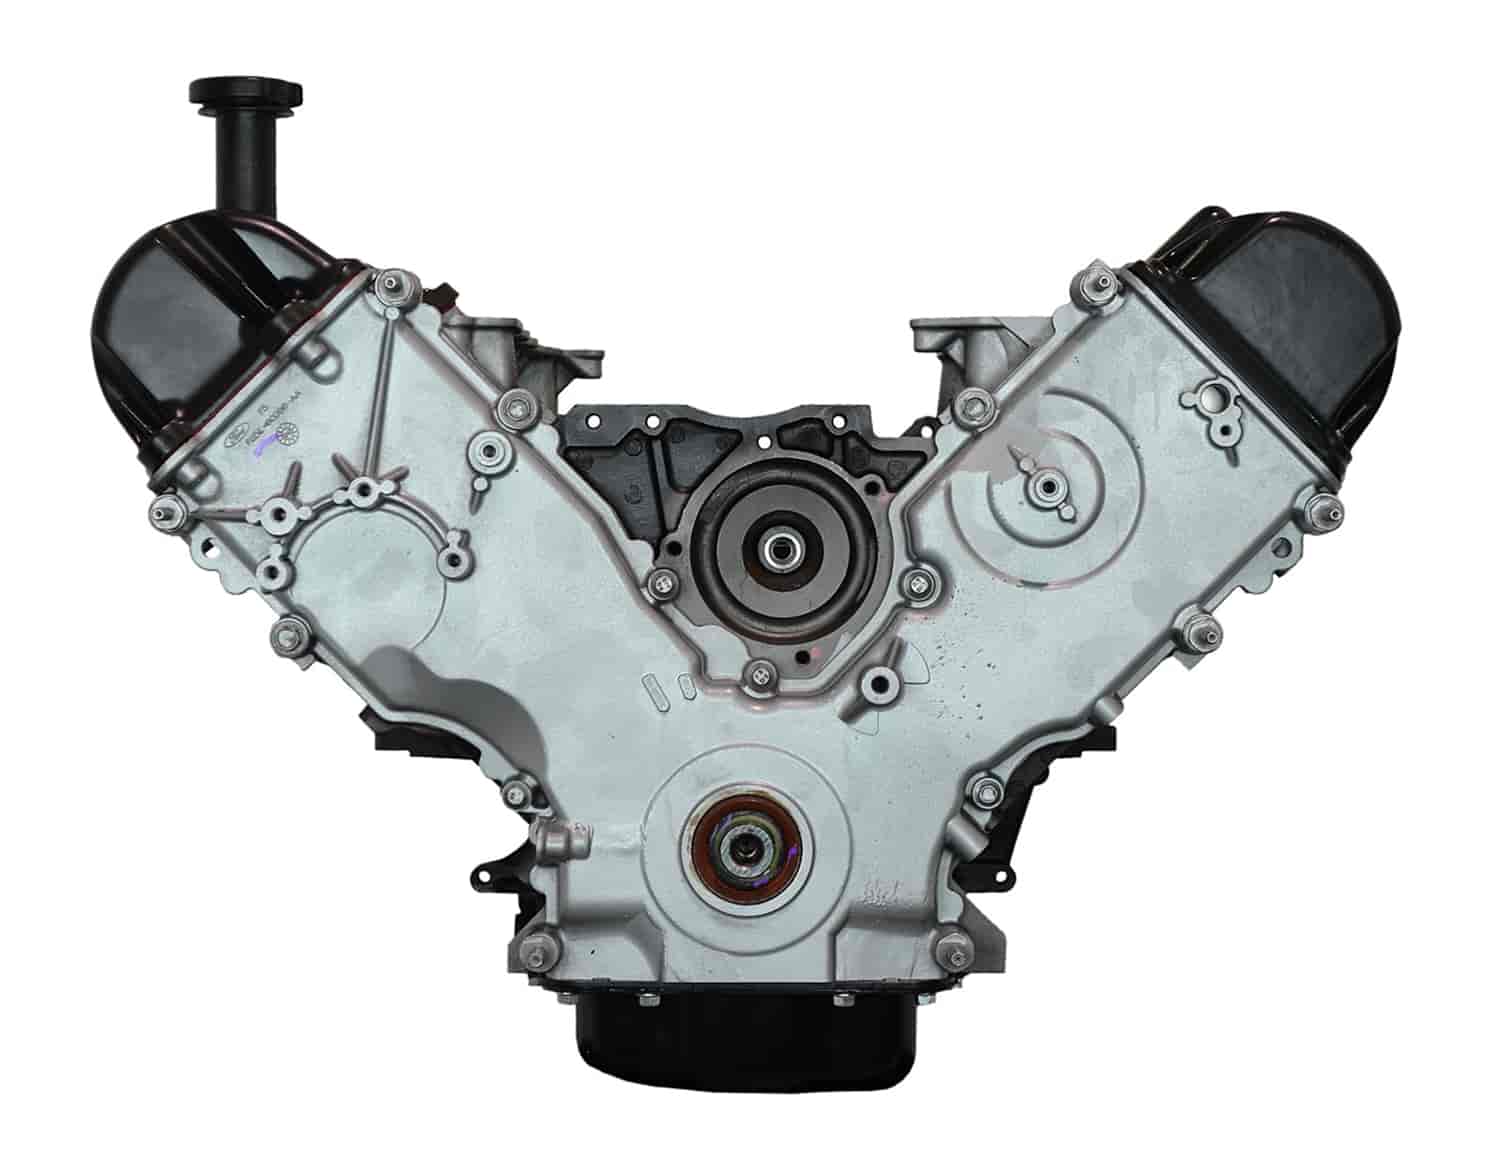 Remanufactured Crate Engine for 1999-2001 Ford E-Series Van with 5.4L V8